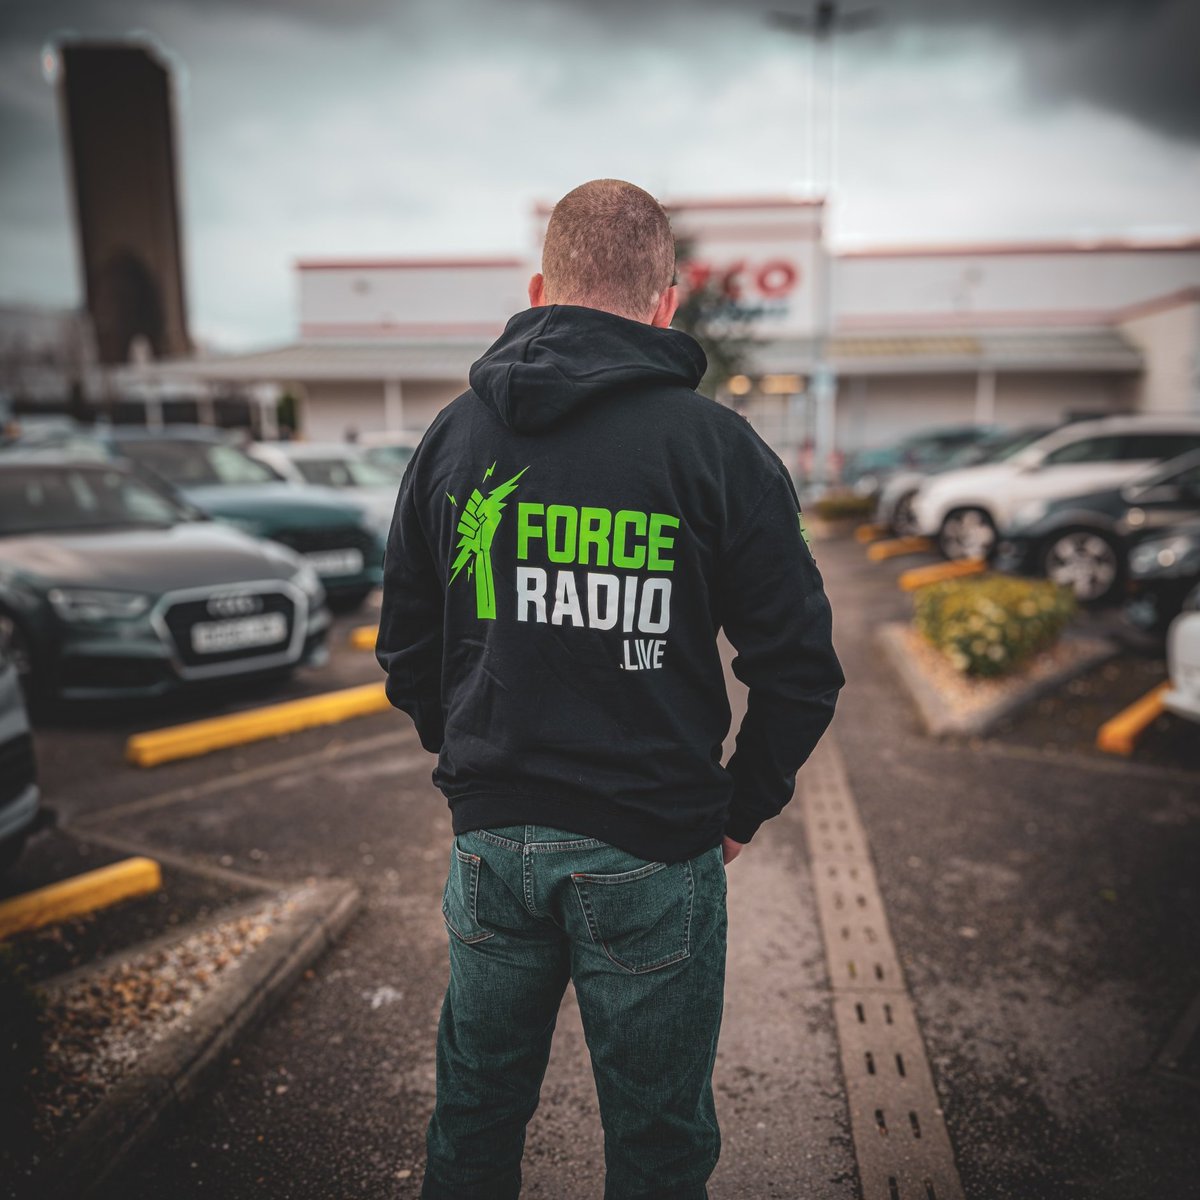 DID YOU KNOW? We have launched our Official Merch in partnership with @forcewearhq! Check out their 'Co Brand & Allies' tab to explore the full collection!

#forceradio #forcewearhq #militarystyle #veterangear #officialmerch